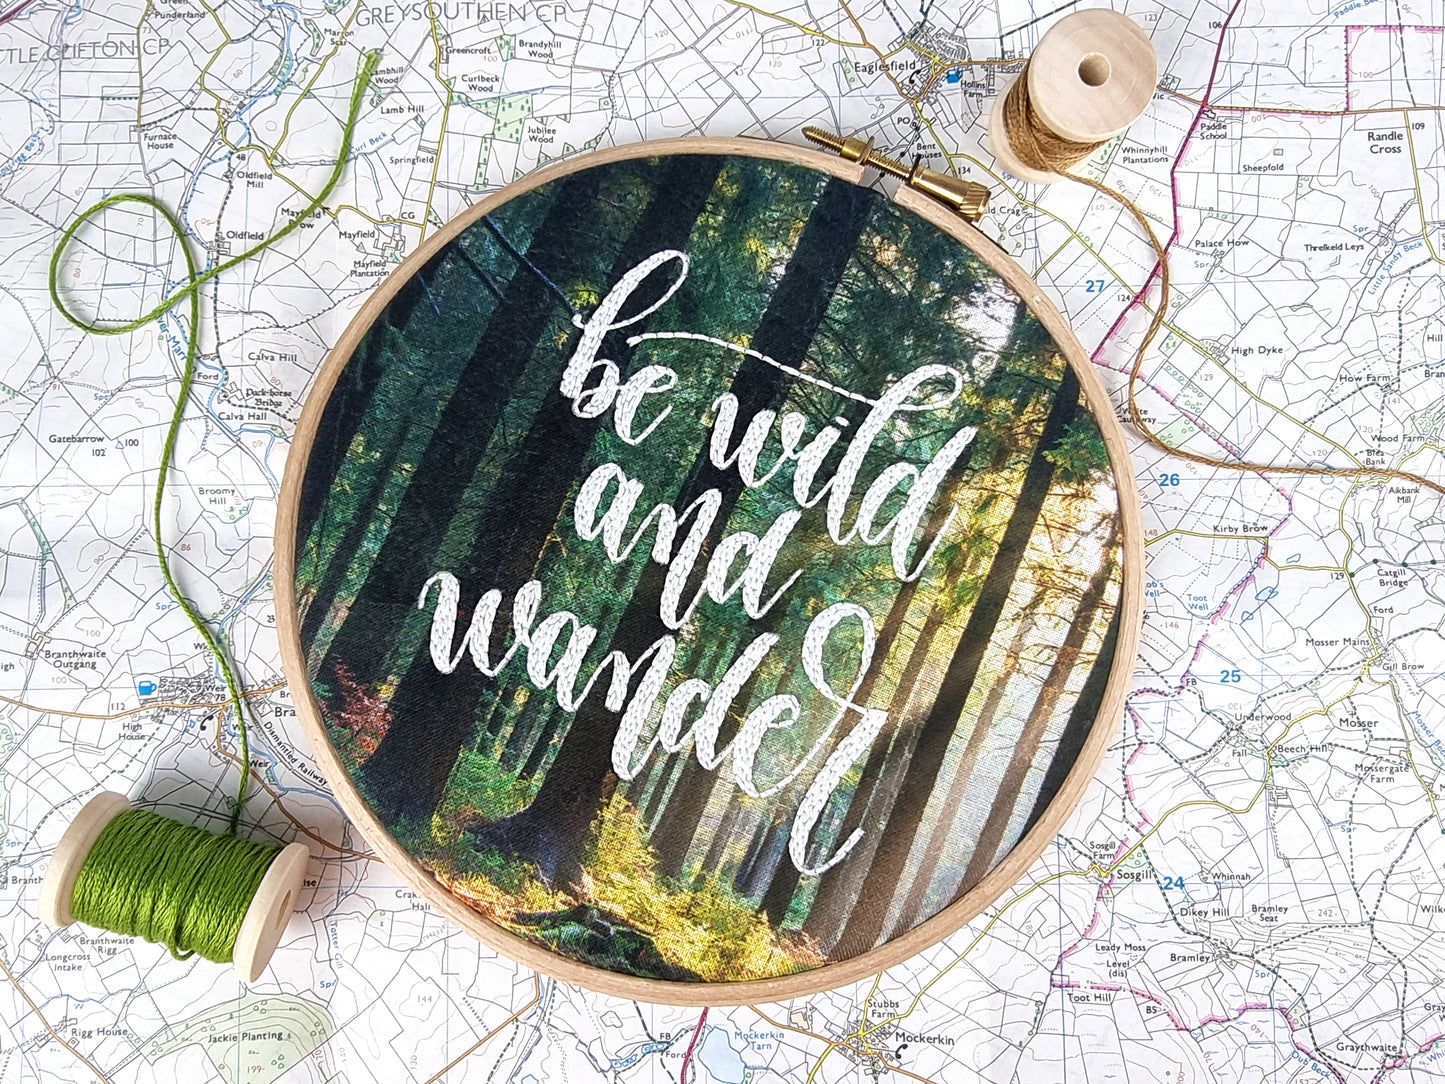 Be Wild and Wander Embroidery Kit - Embroidery Kits - ohsewbootiful